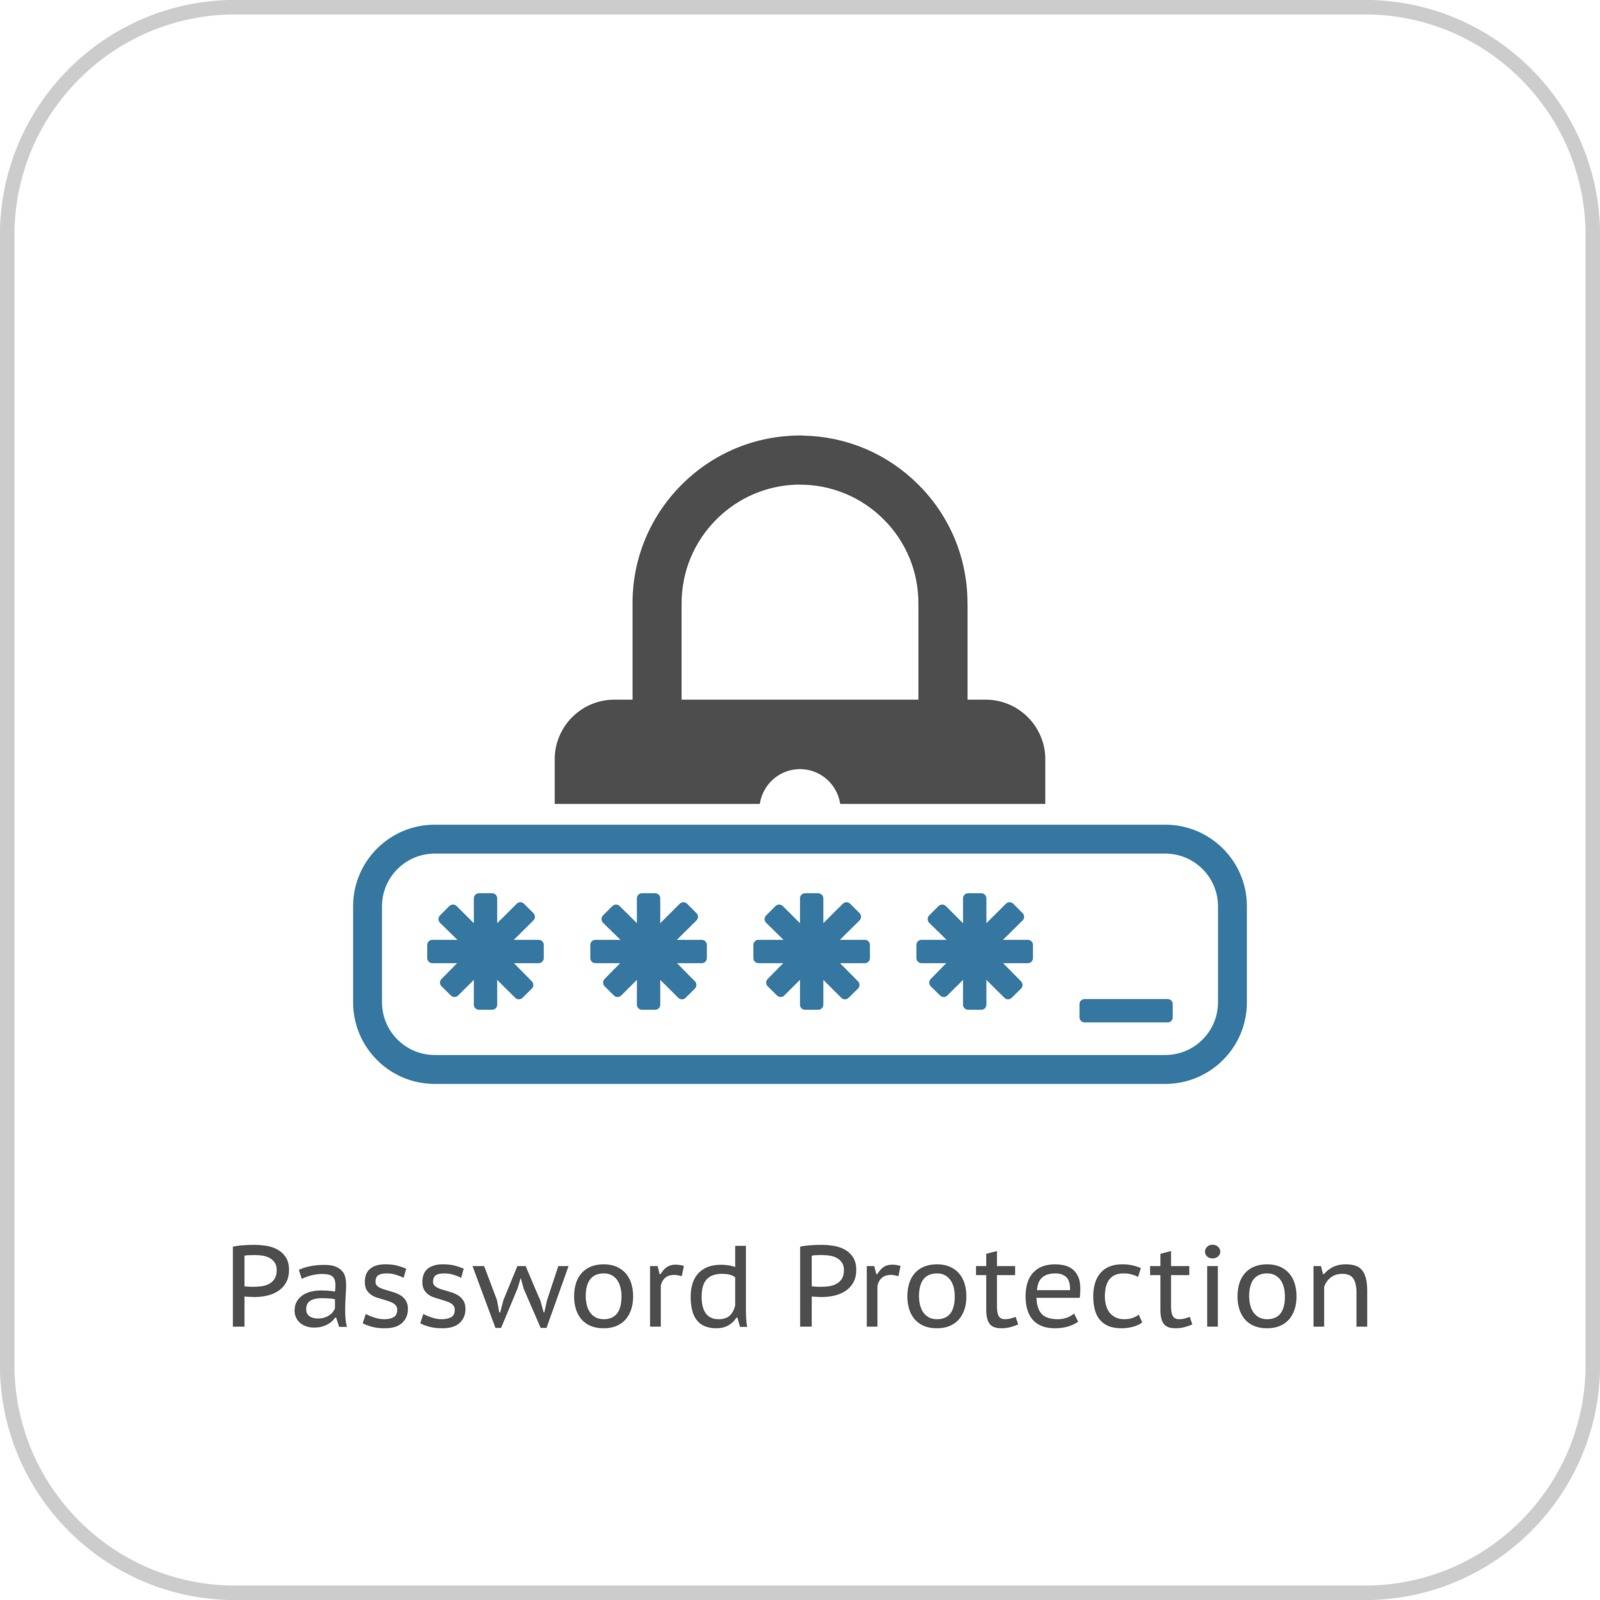 Password Protection Icon. Flat Design. Business Concept Isolated Illustration.